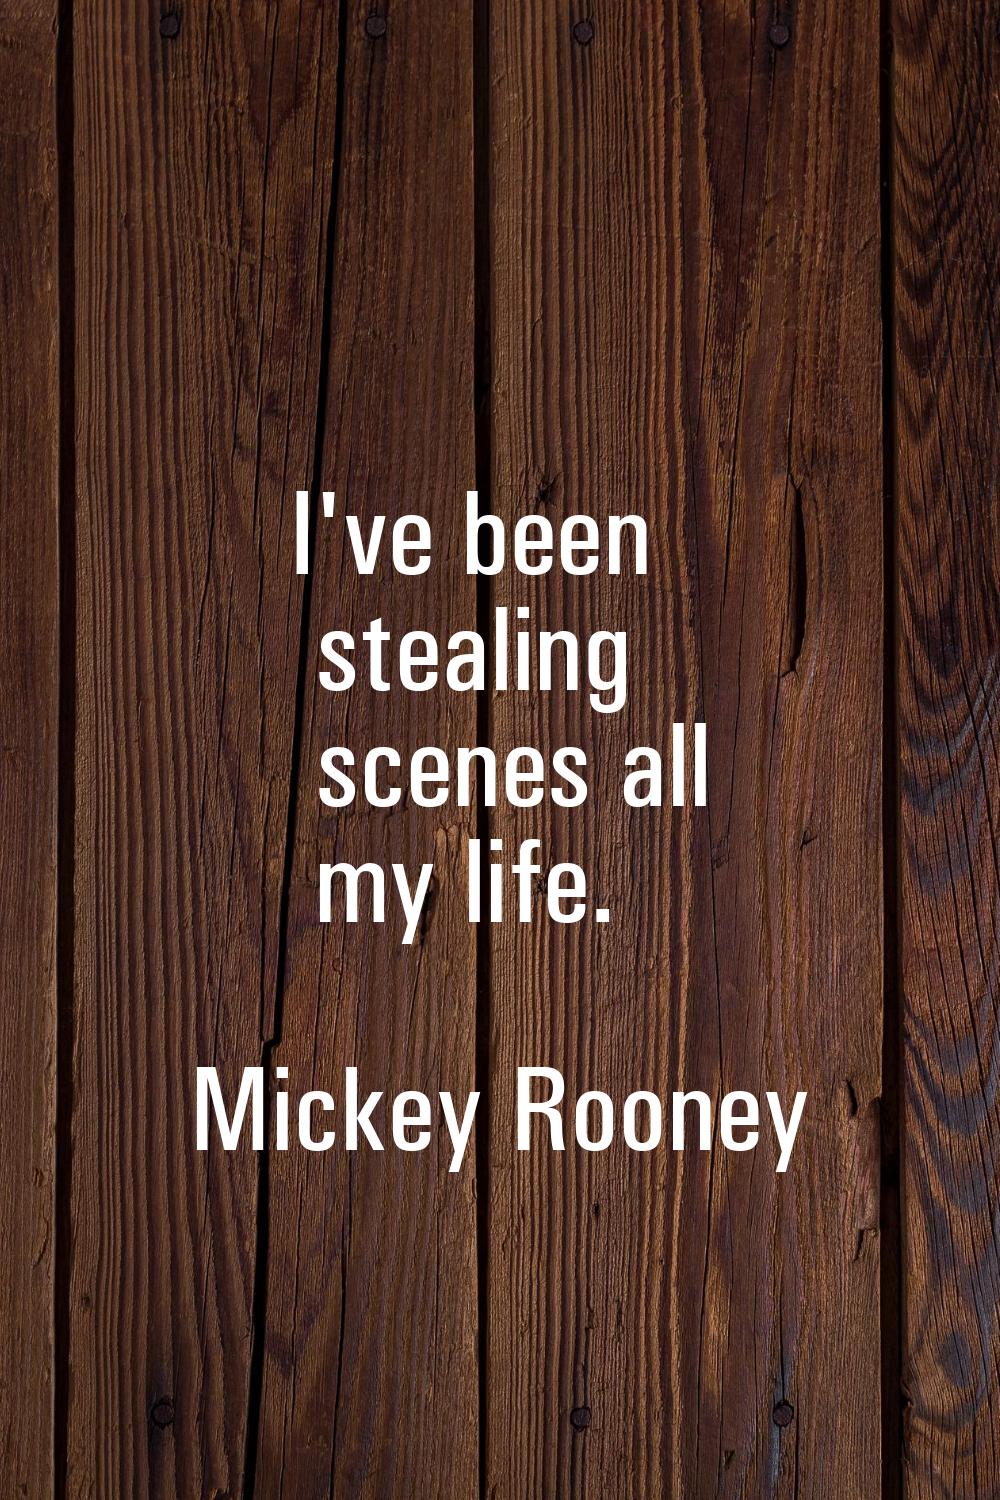 I've been stealing scenes all my life.